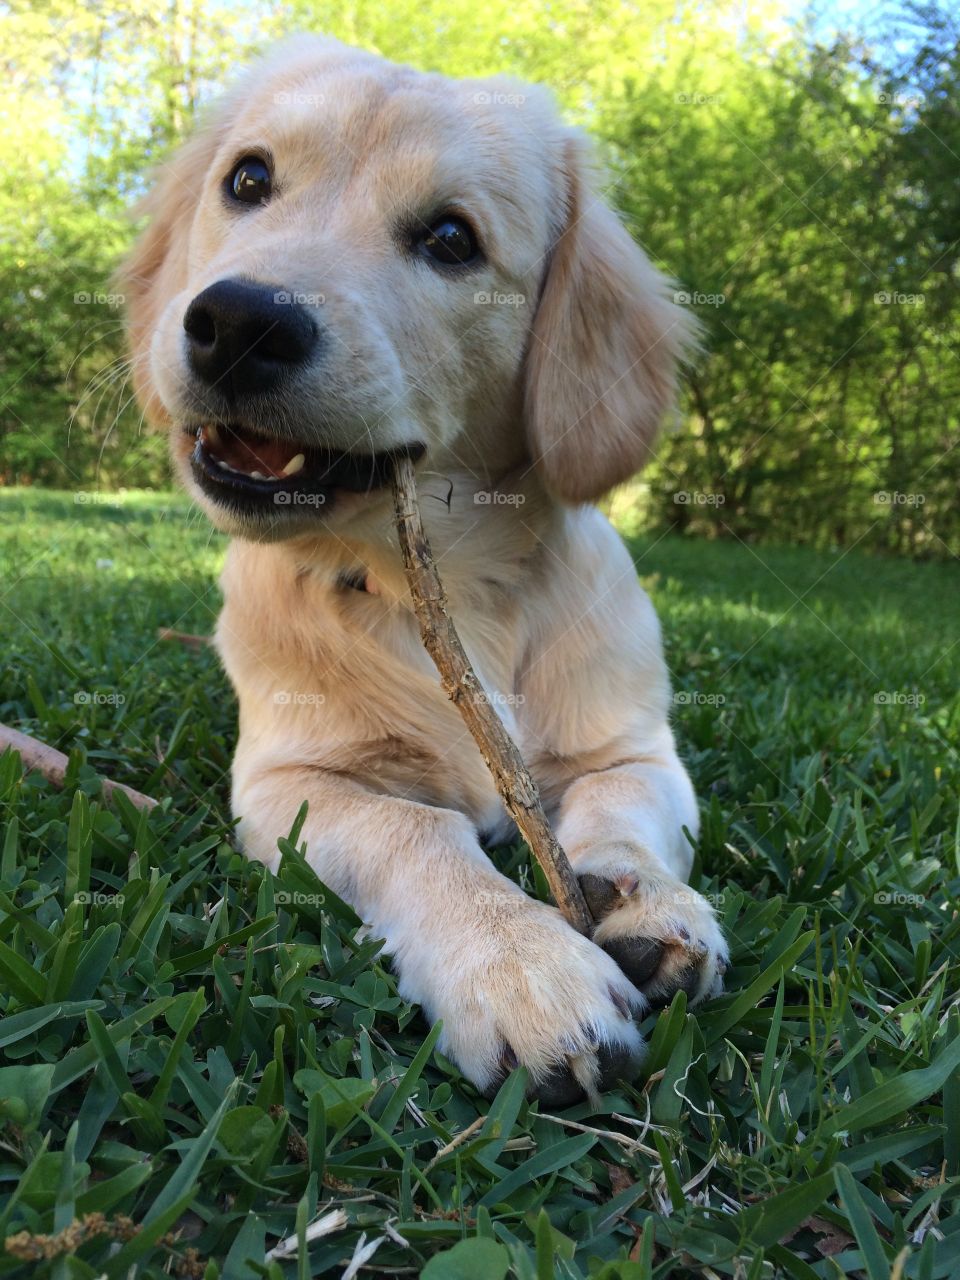 Portrait of a puppy chewing on a wooden stick